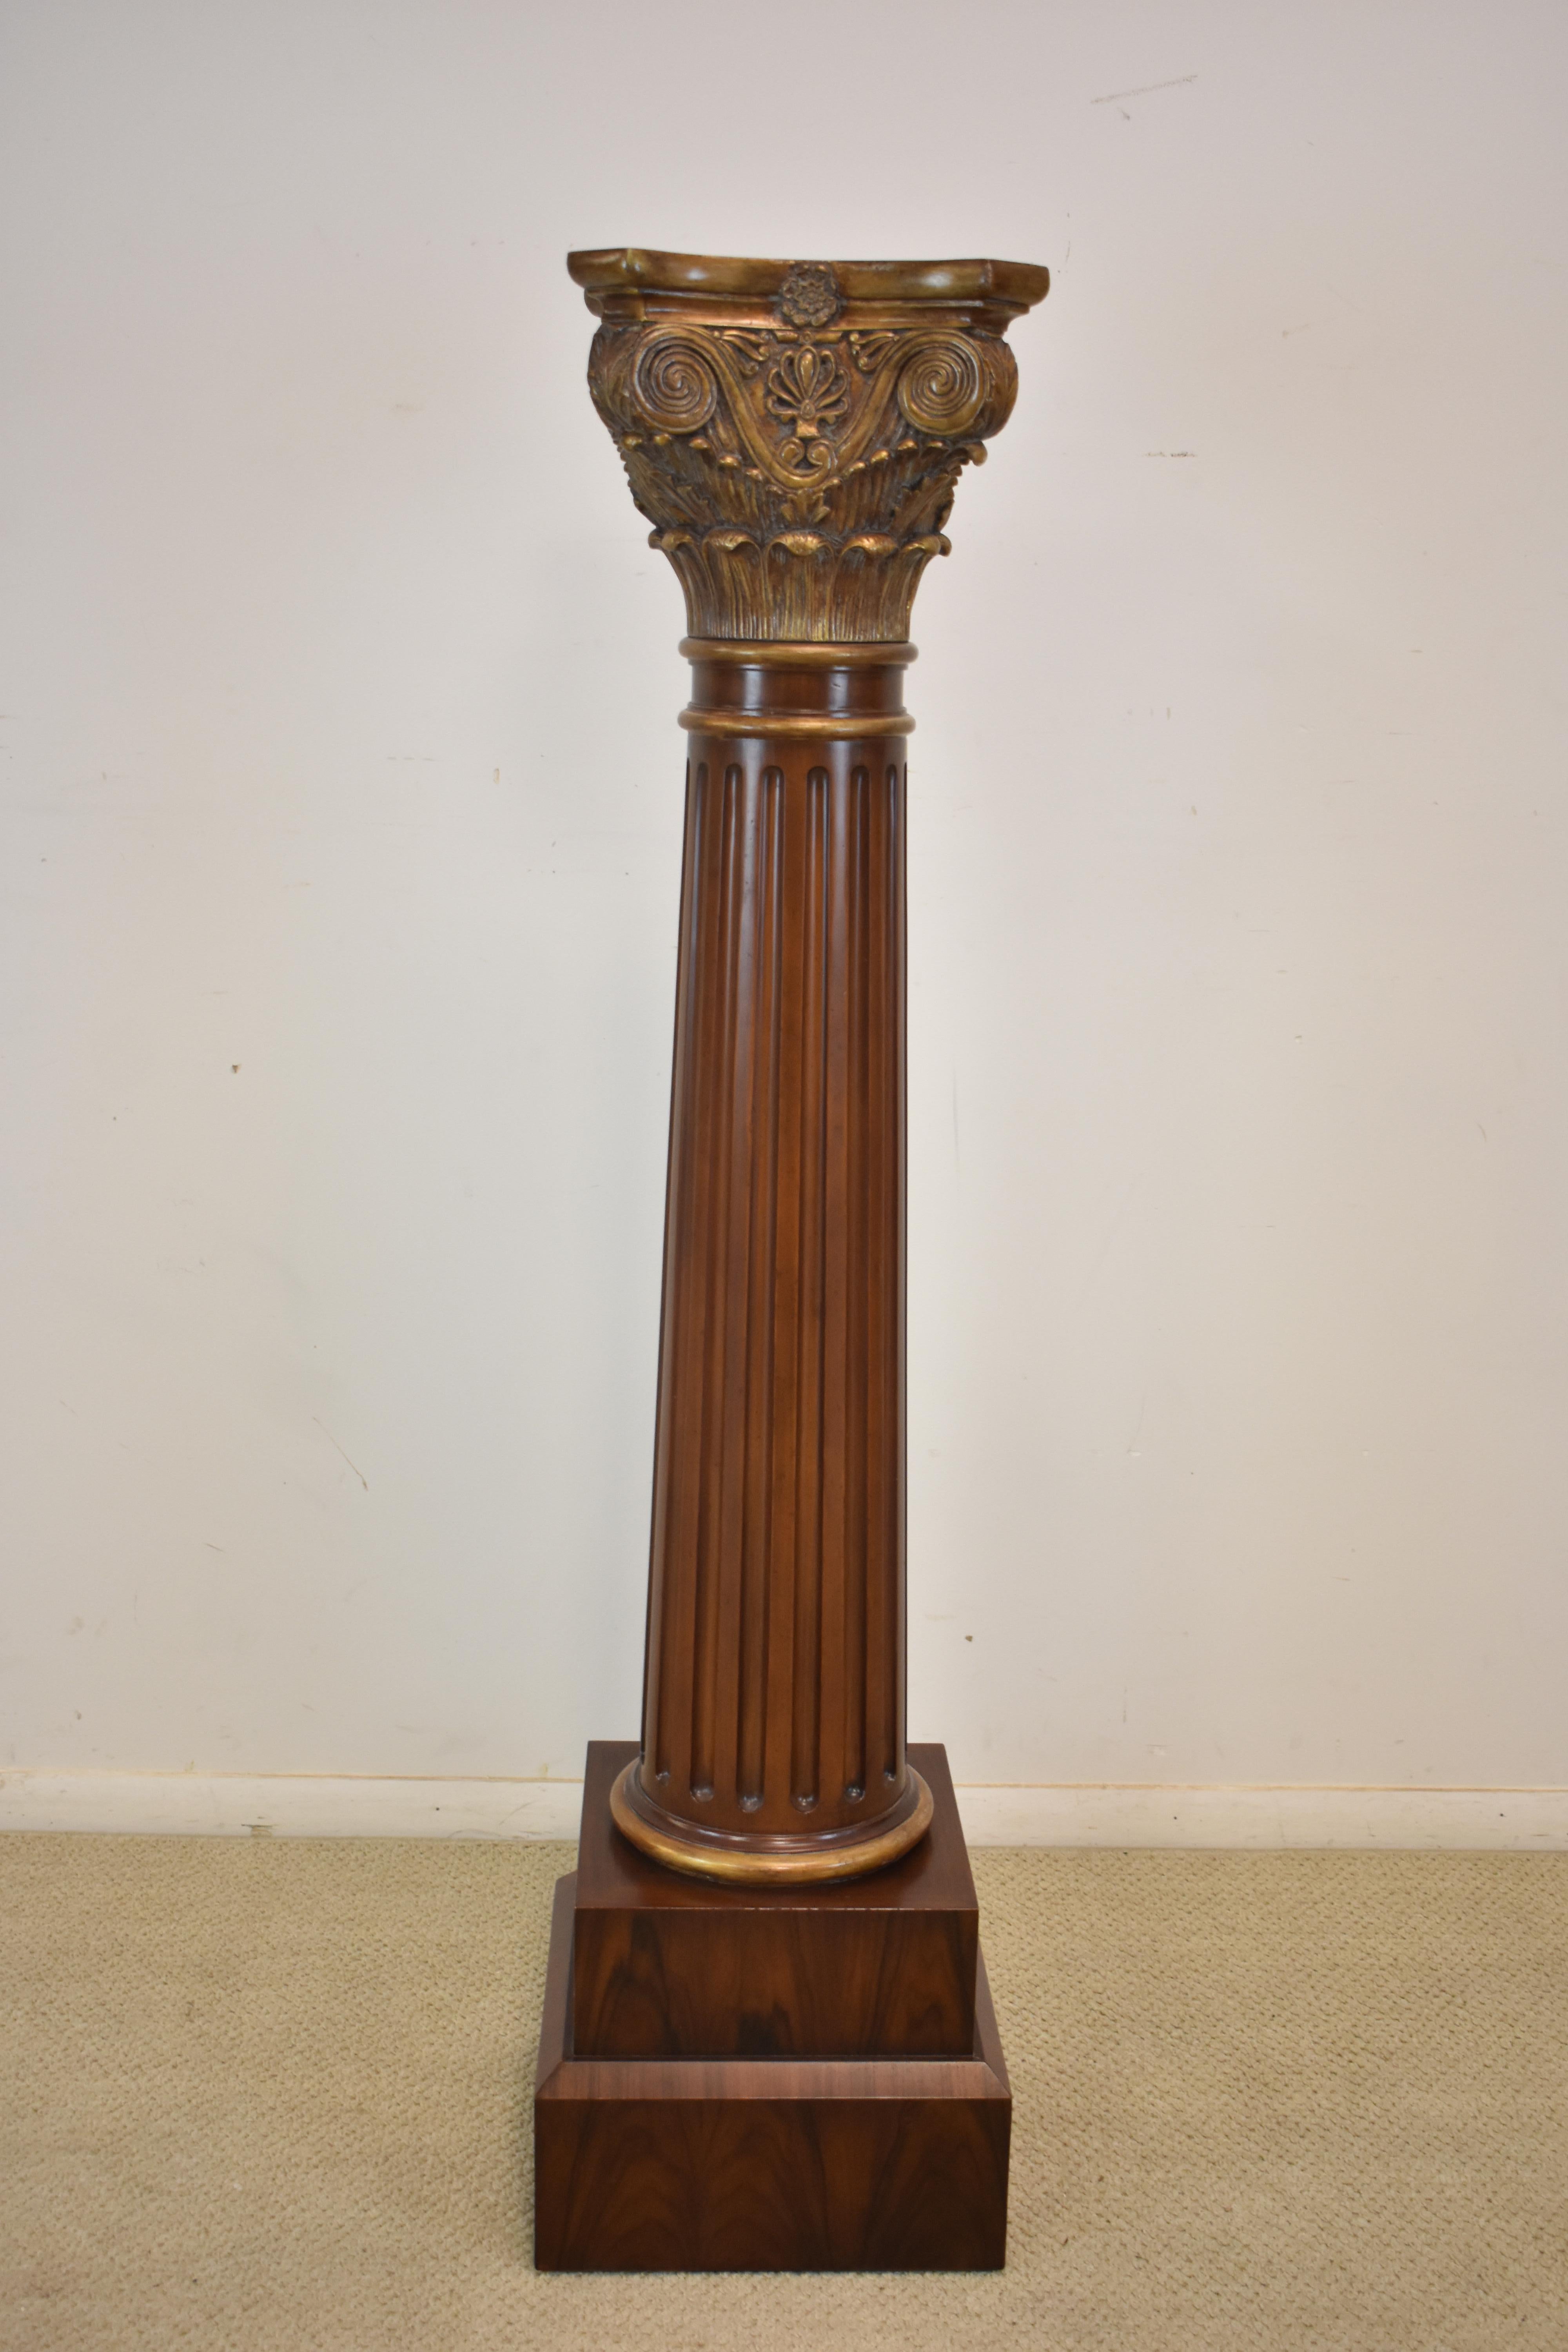 Hand-carved burled rosewood with gold gilt detail fluted column by Maitland Smith. Scroll, shell and floral details with a staggered base, Burled Rosewood with Corinthian top, for plants, statue or display.